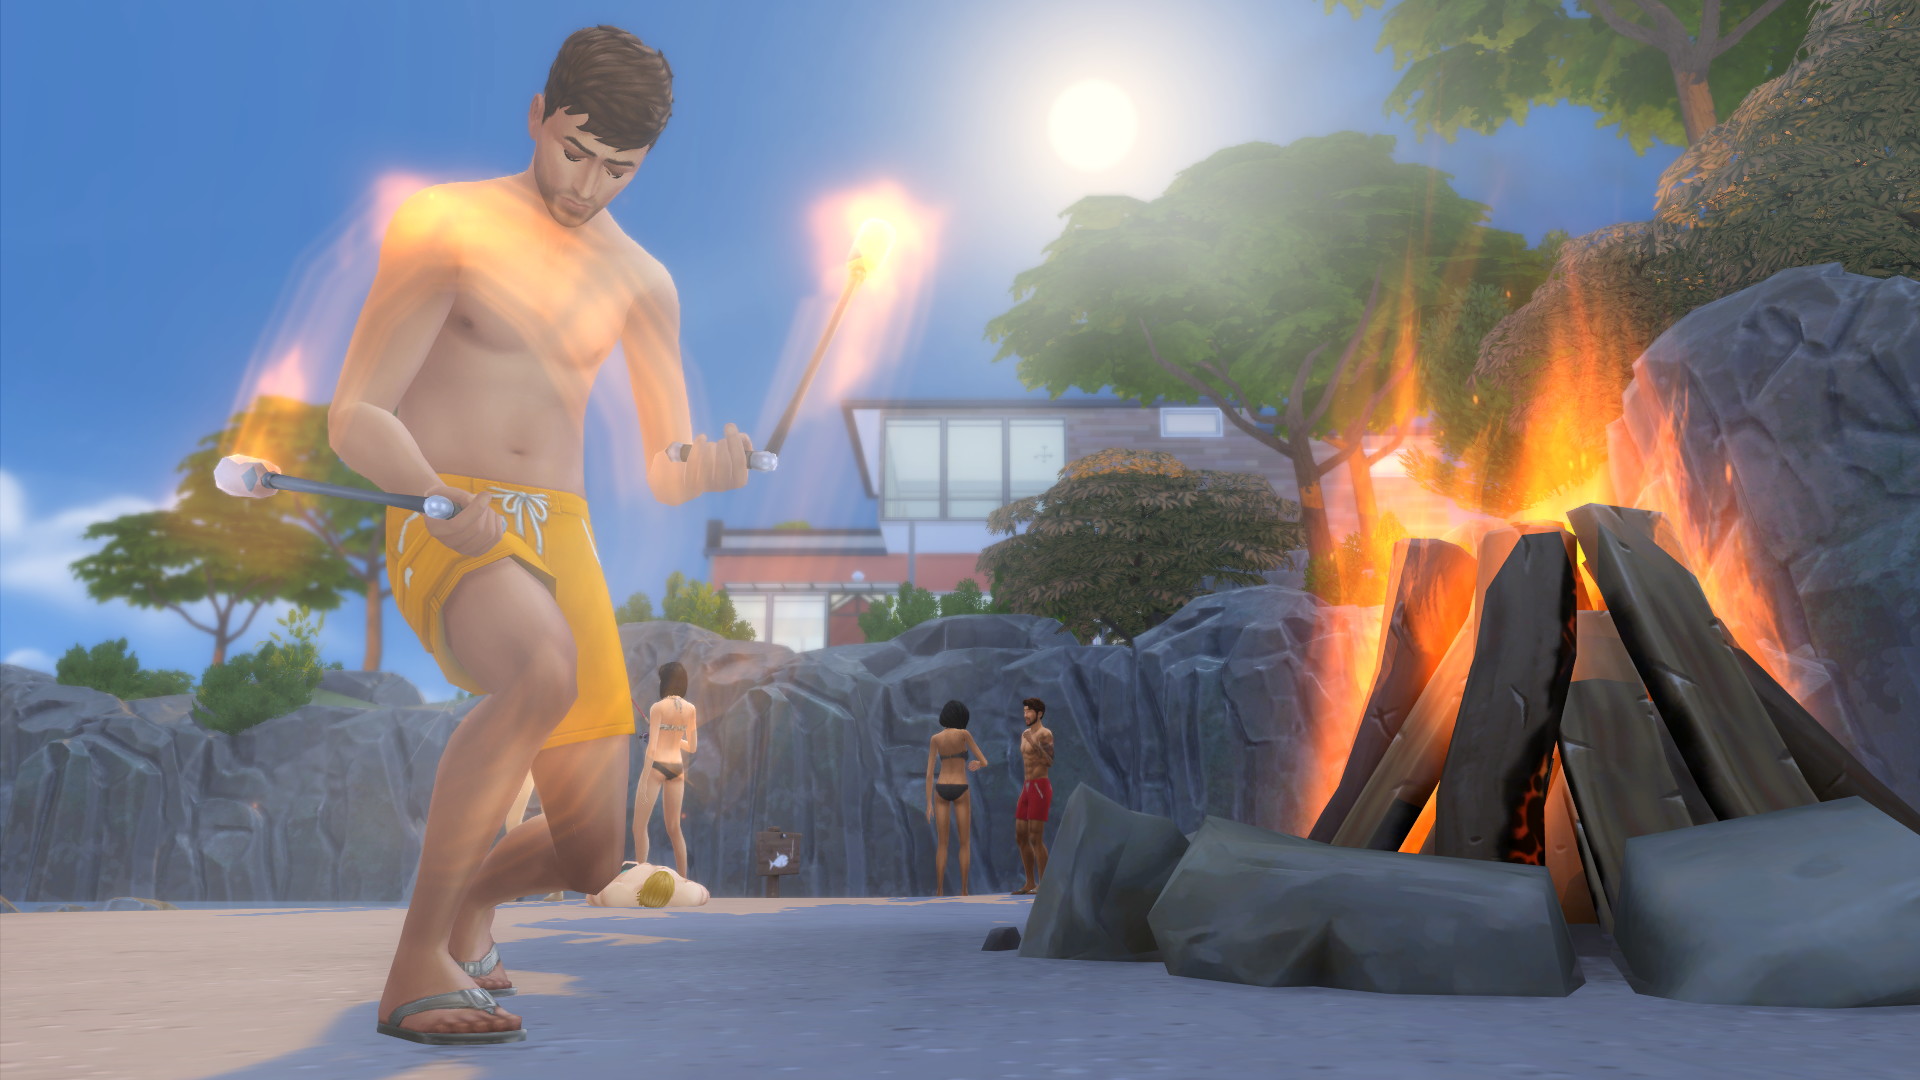 The Sims 4: Get Together - screenshot 14